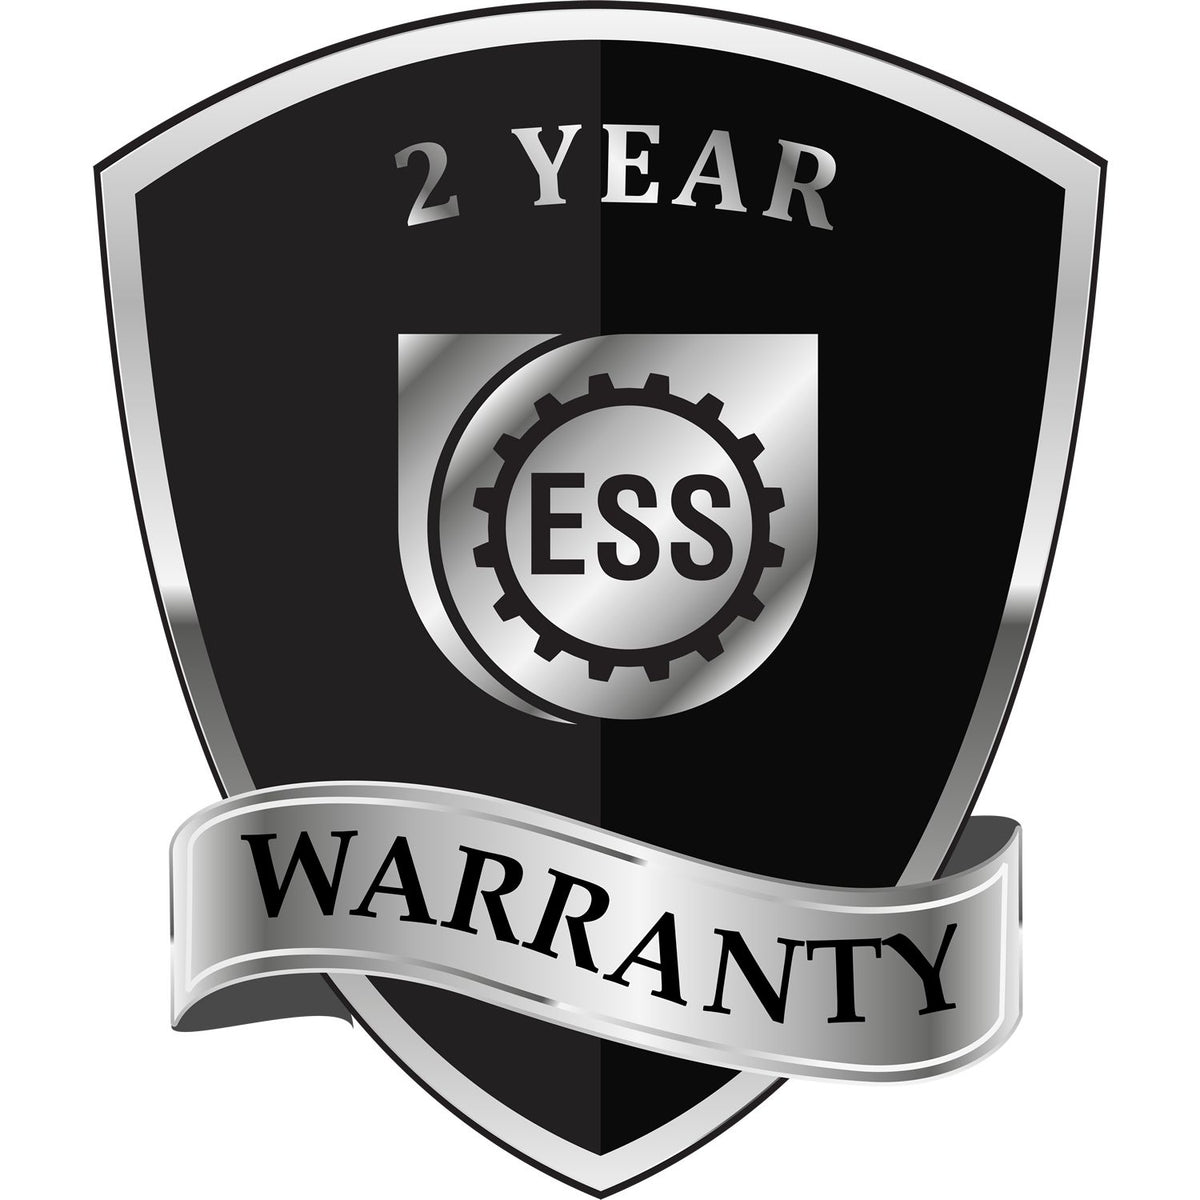 A black and silver badge or emblem showing warranty information for the Heavy Duty Cast Iron Nevada Geologist Seal Embosser